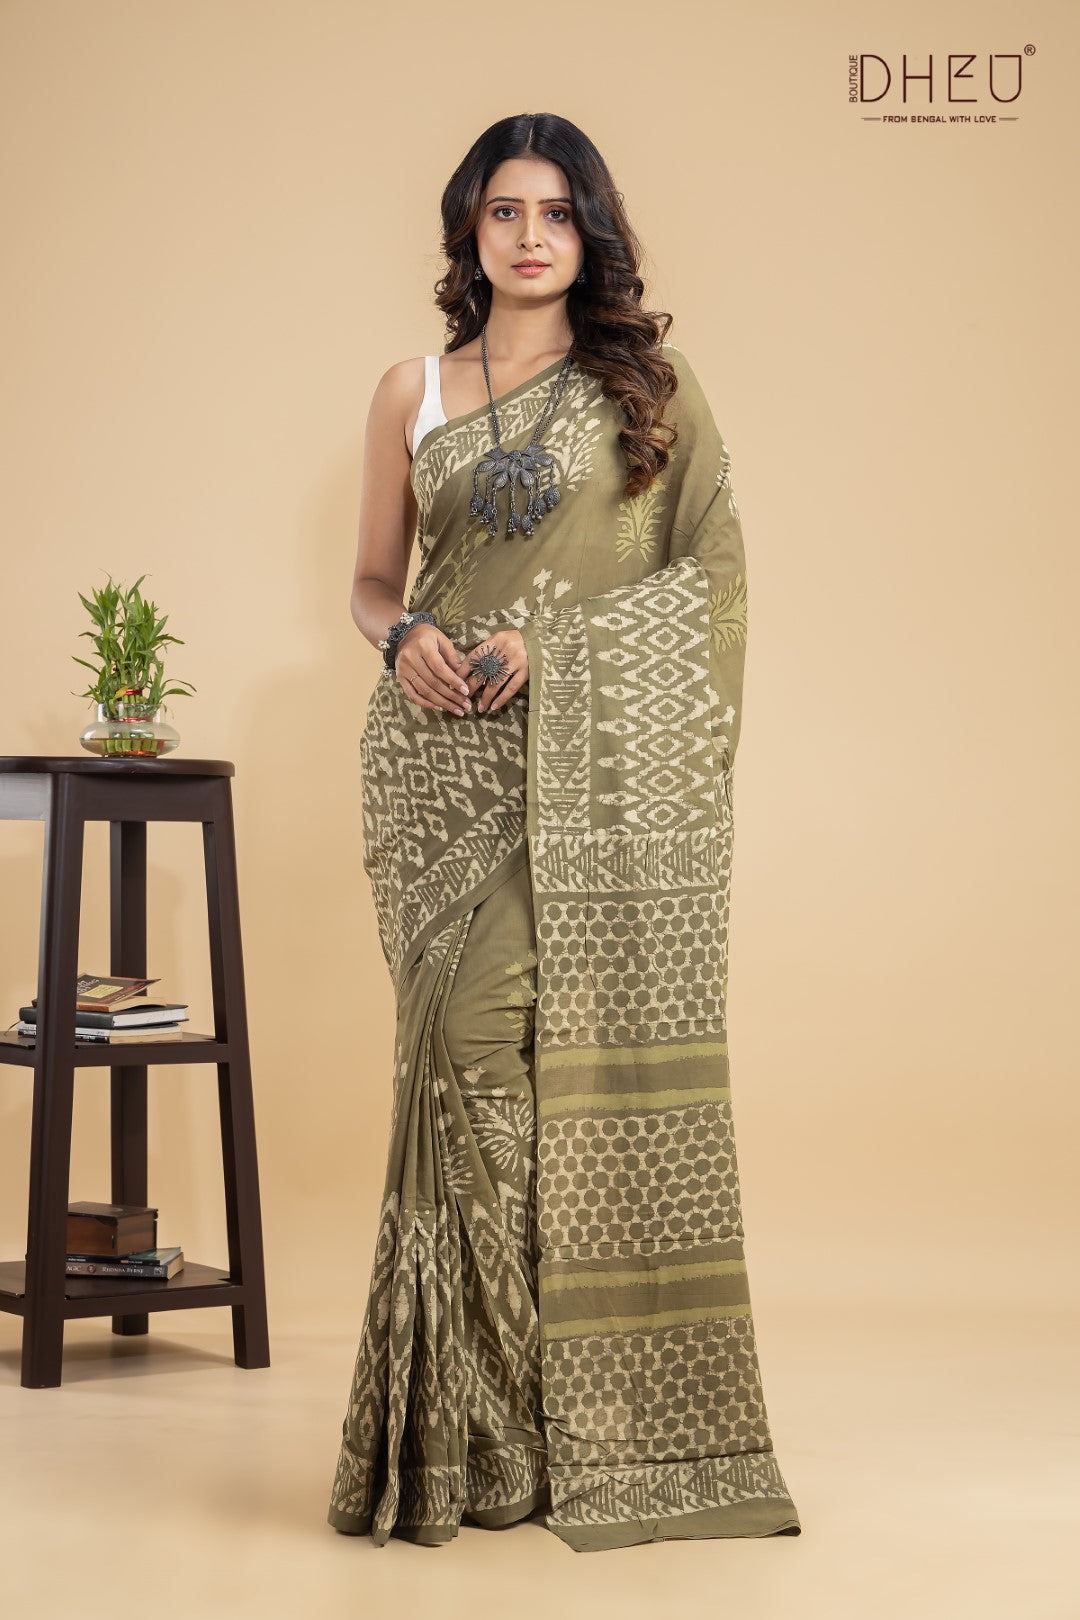 Designer Handloom  Cotton with Ajrakh print saree at lowest price at dheu.in